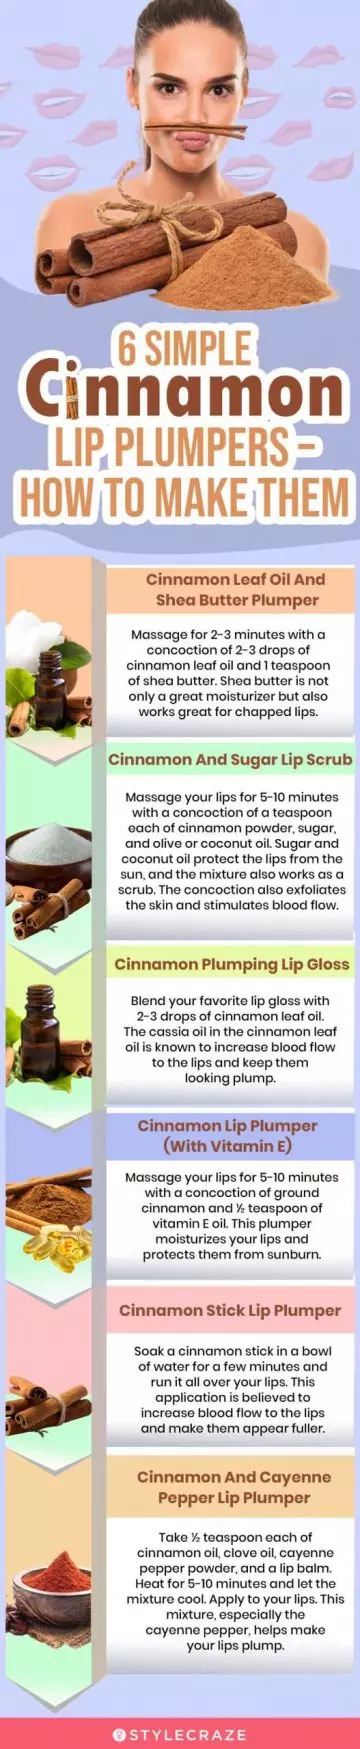 6 simple cinnamon lip plumpers – how to make them (infographic)